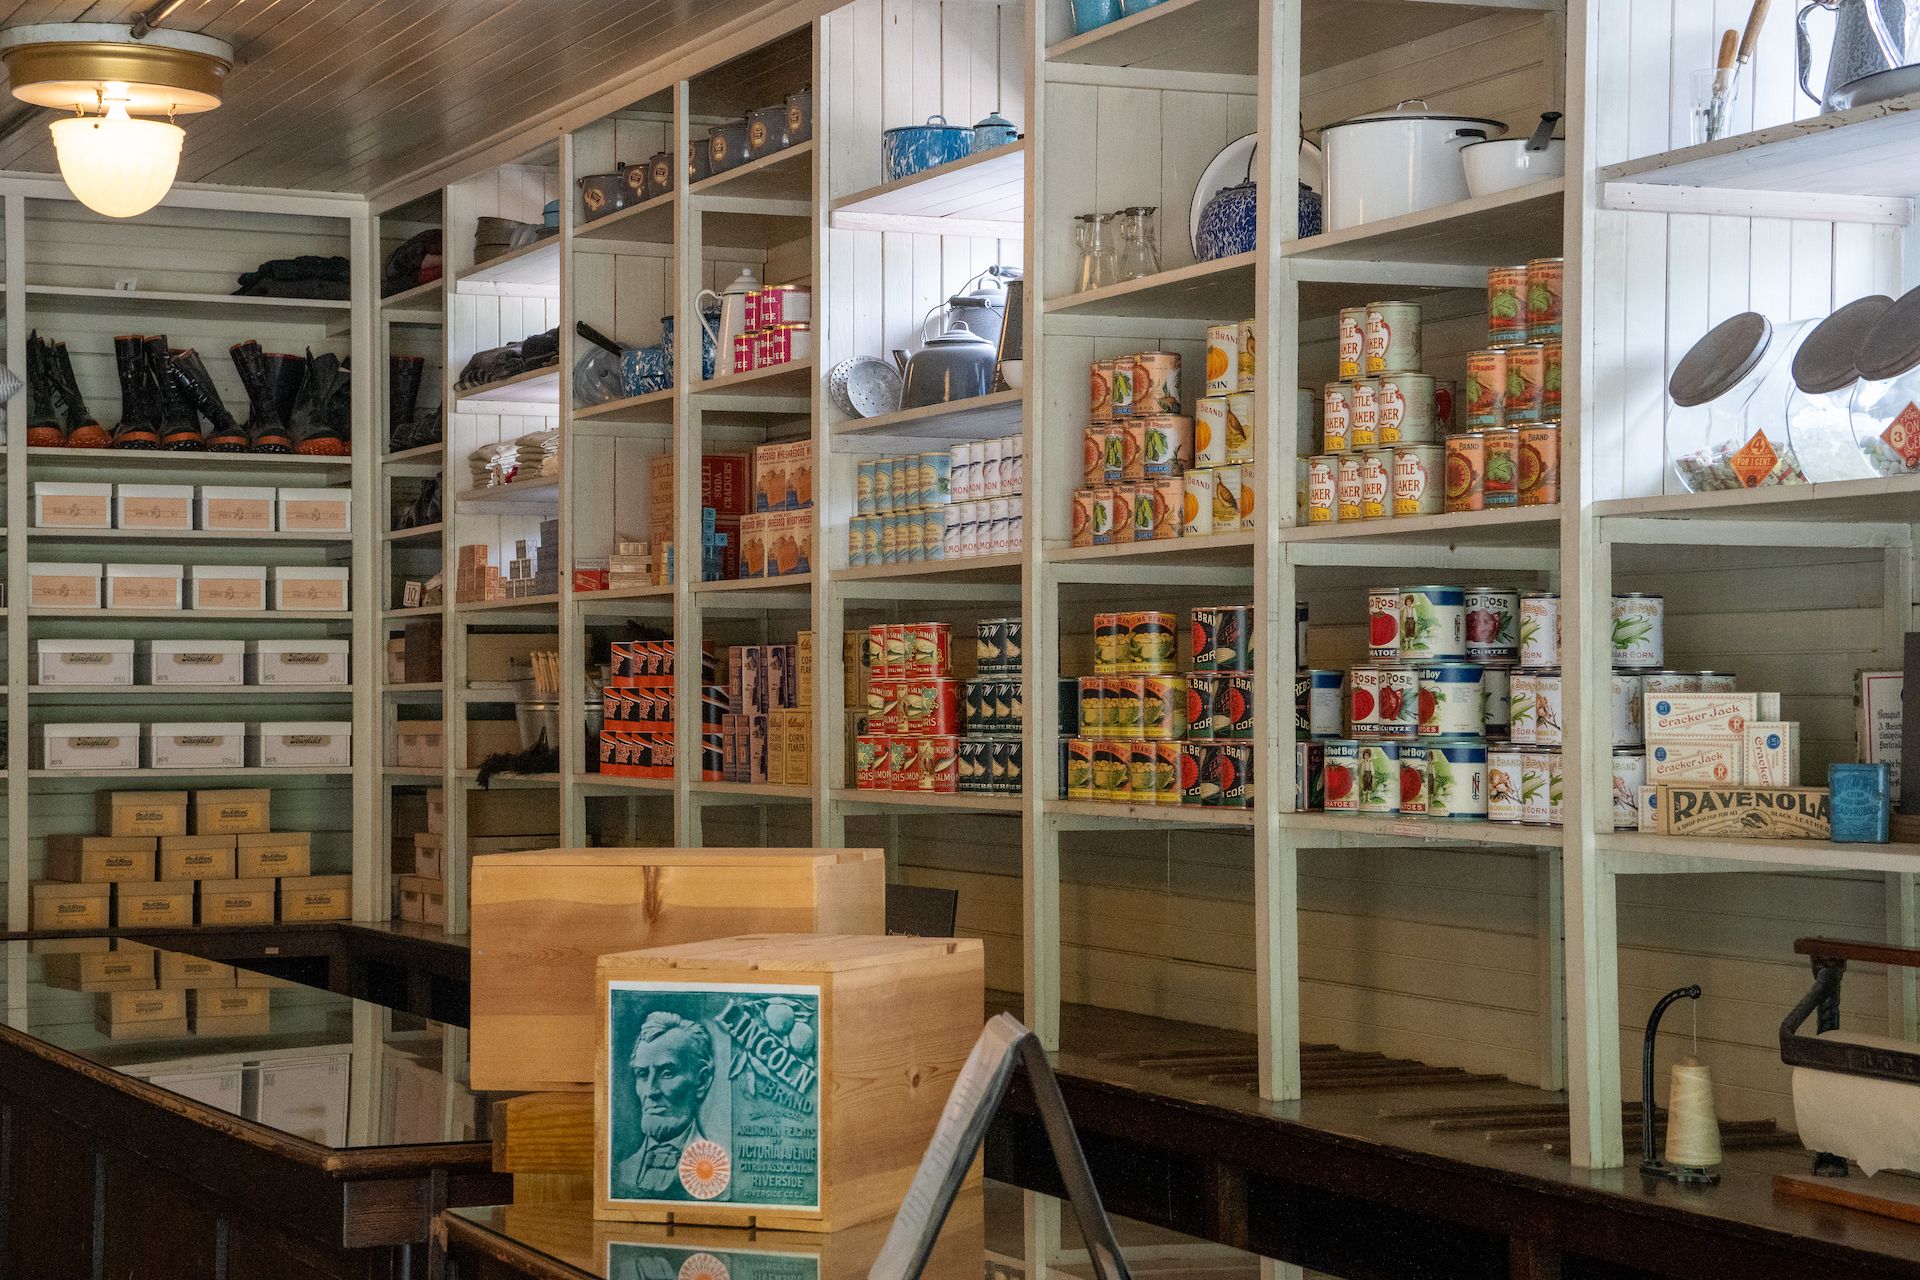 The National Park Service recreated the local grocery store like what it used to be back in the days.